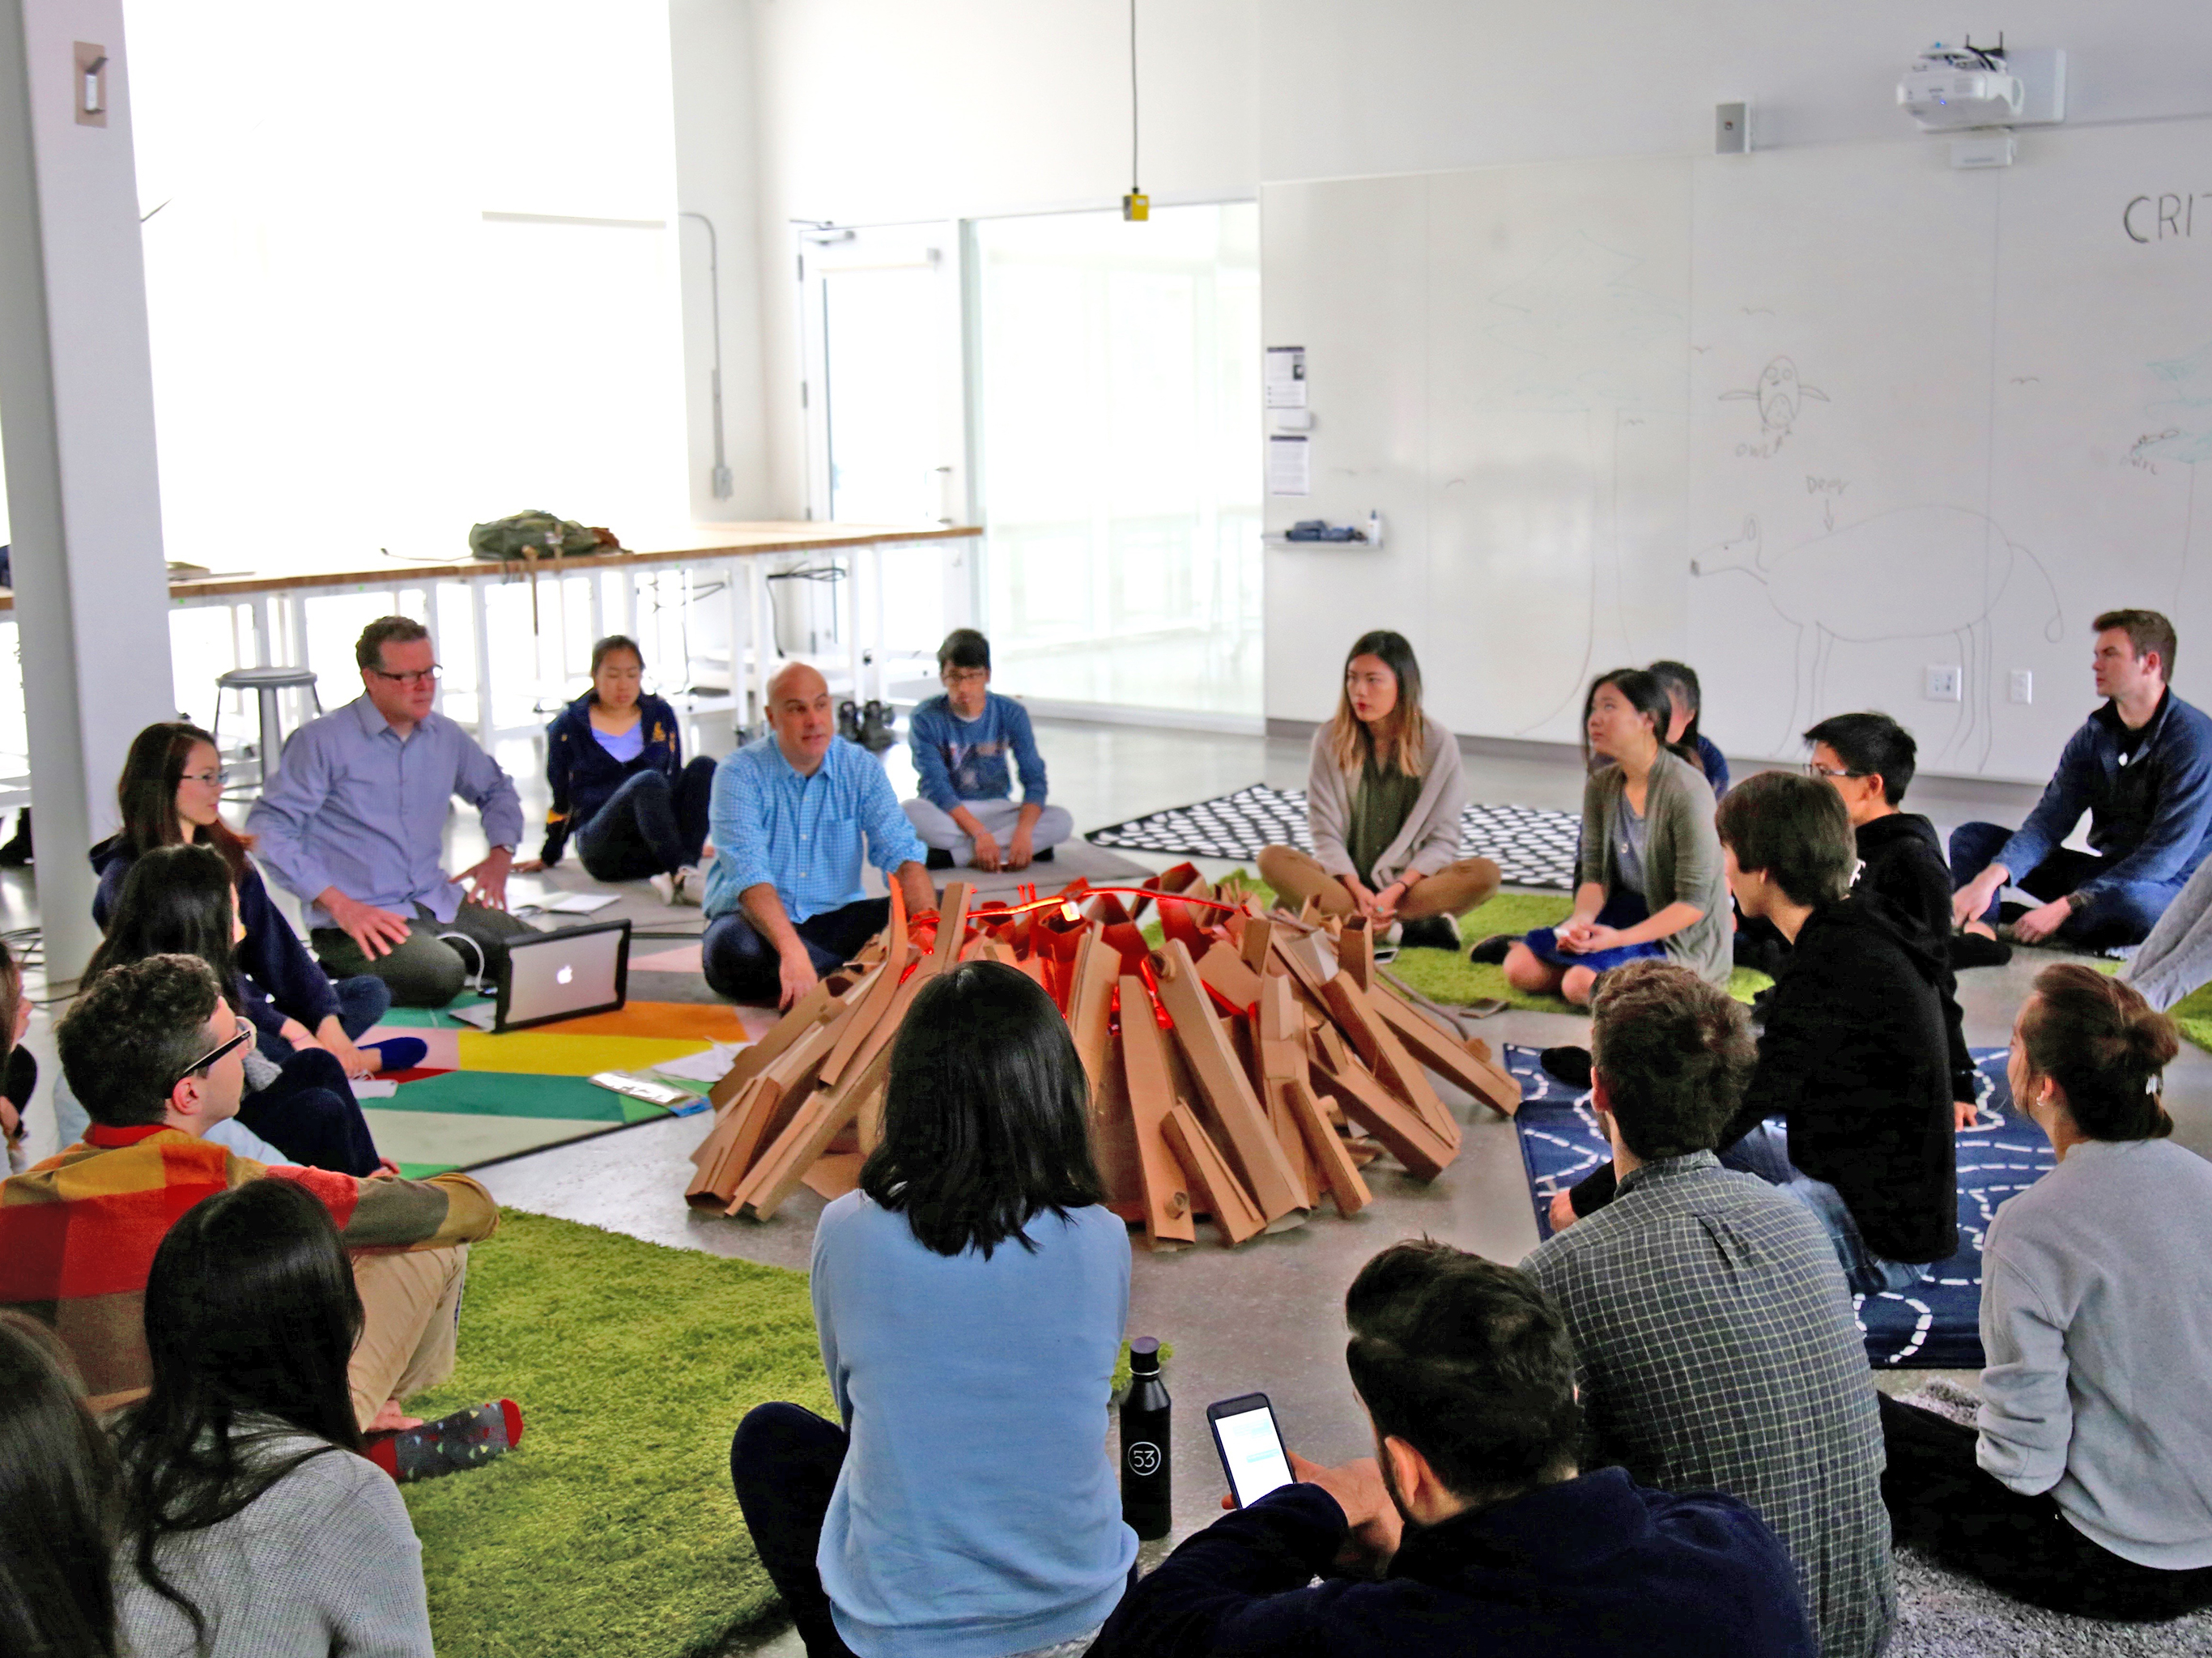 Critical Making: Curriculum in Art, Design, Engineering, and Culture at UC Berkeley